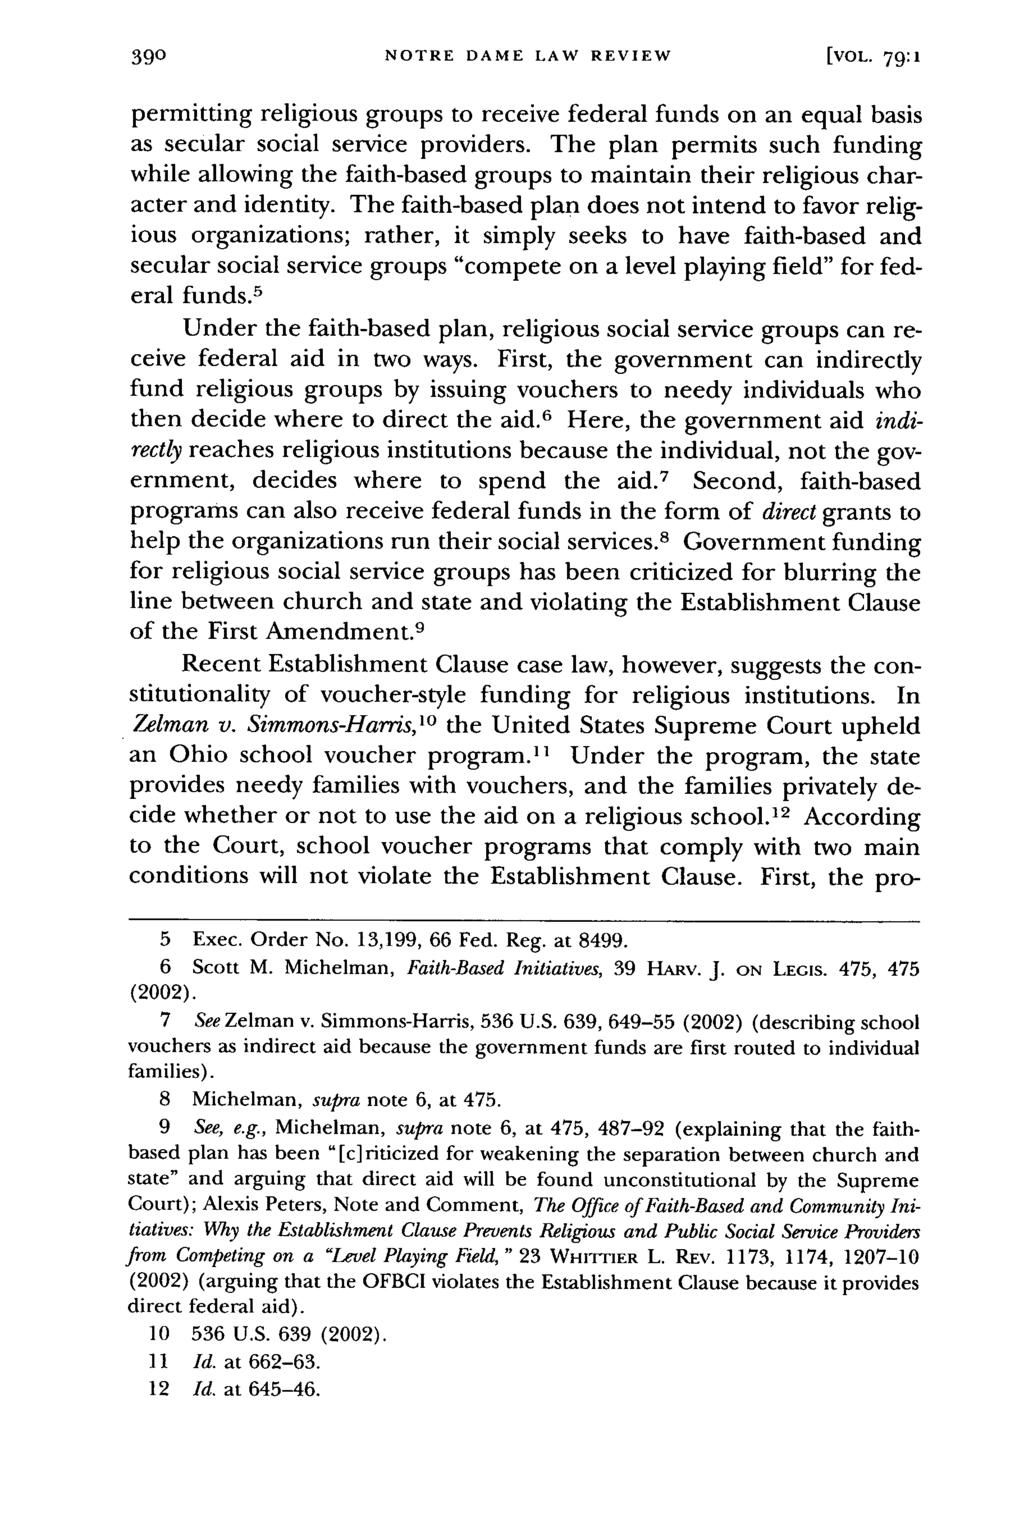 NOTRE DAME LAW REVIEW [VOL- 79:1 permitting religious groups to receive federal funds on an equal basis as secular social service providers.